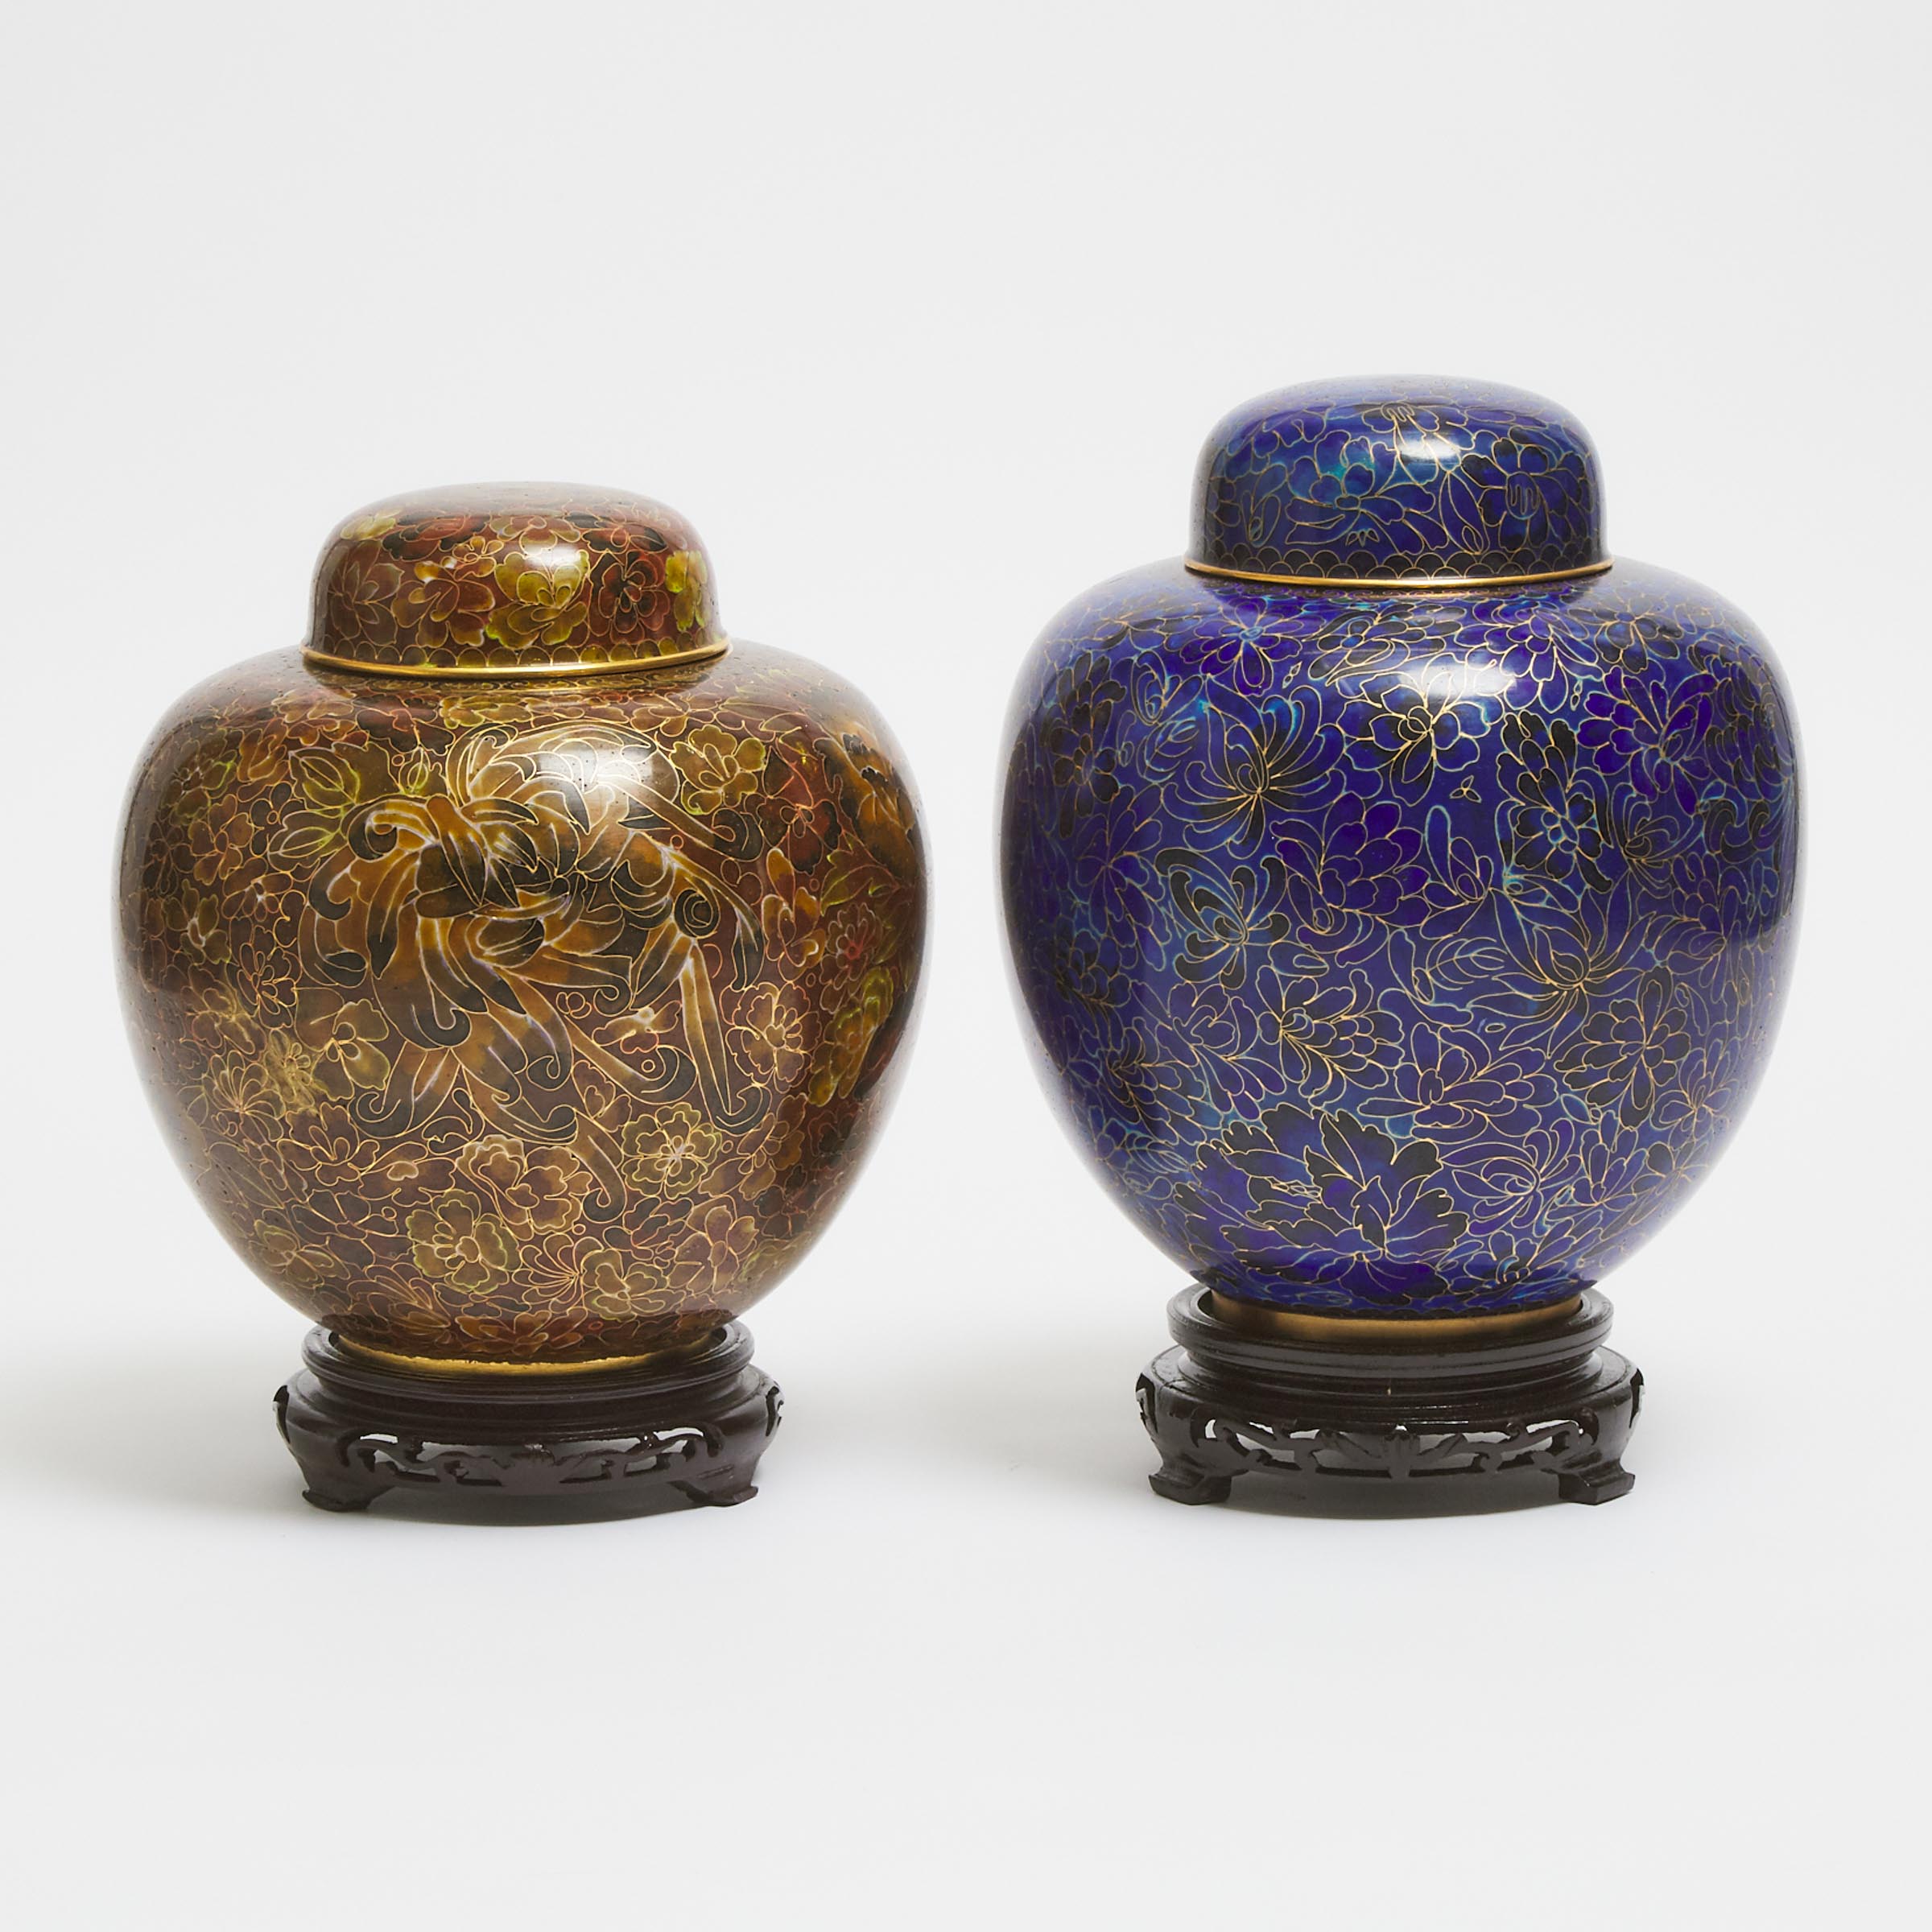 Two Chinese Cloisonné Lidded Ginger Jars, 20th Century